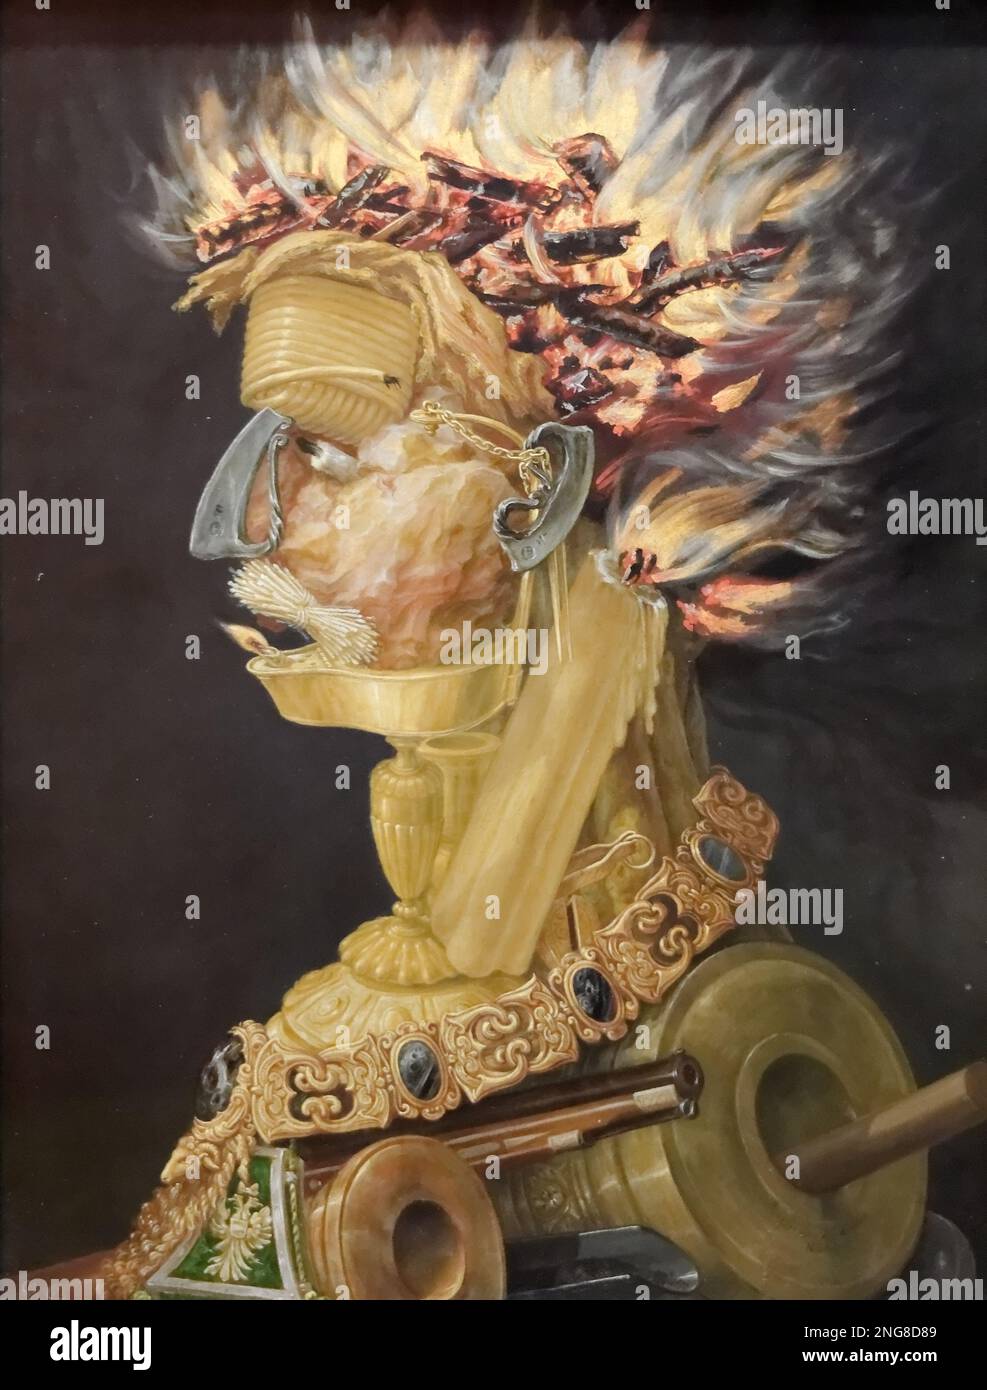 Fire by Giuseppe Arcimboldo, part of The Four Elemenst series painted for Maximilian II, the Holy Roman Emperor Stock Photo